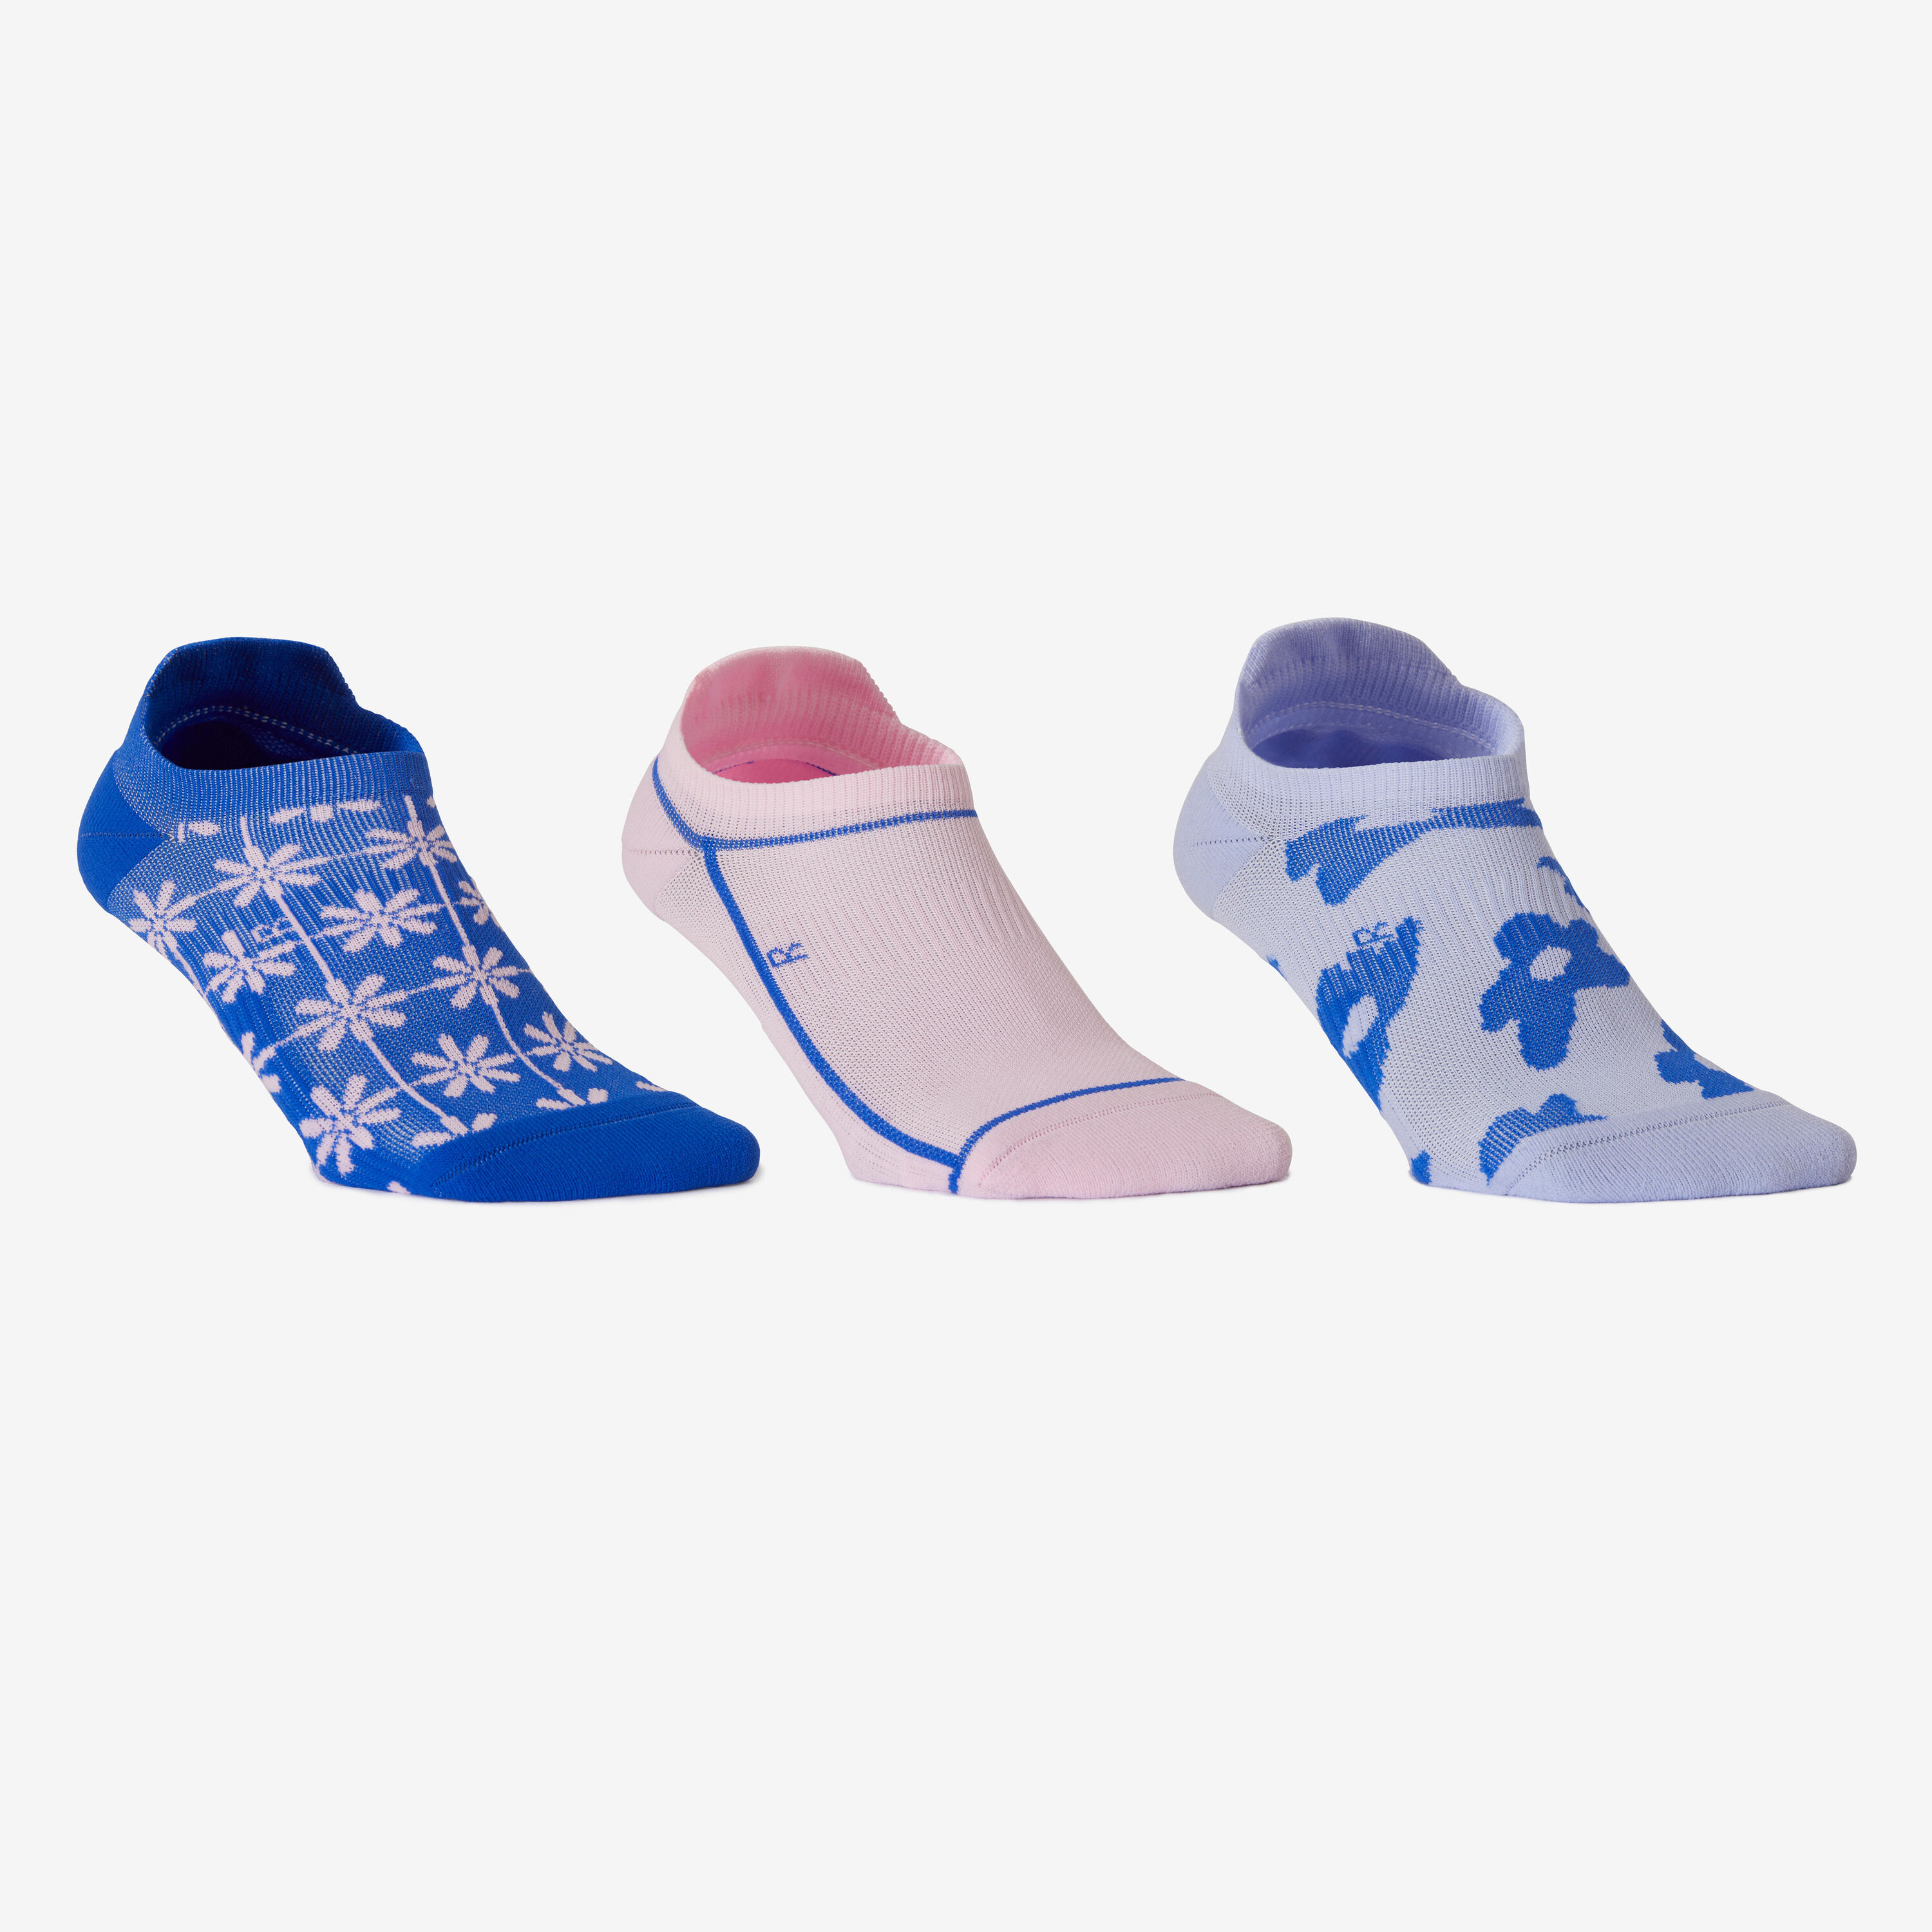 DOMYOS Fitness Cardio Training Invisible Socks Tri-Pack - Blue/Pink Print